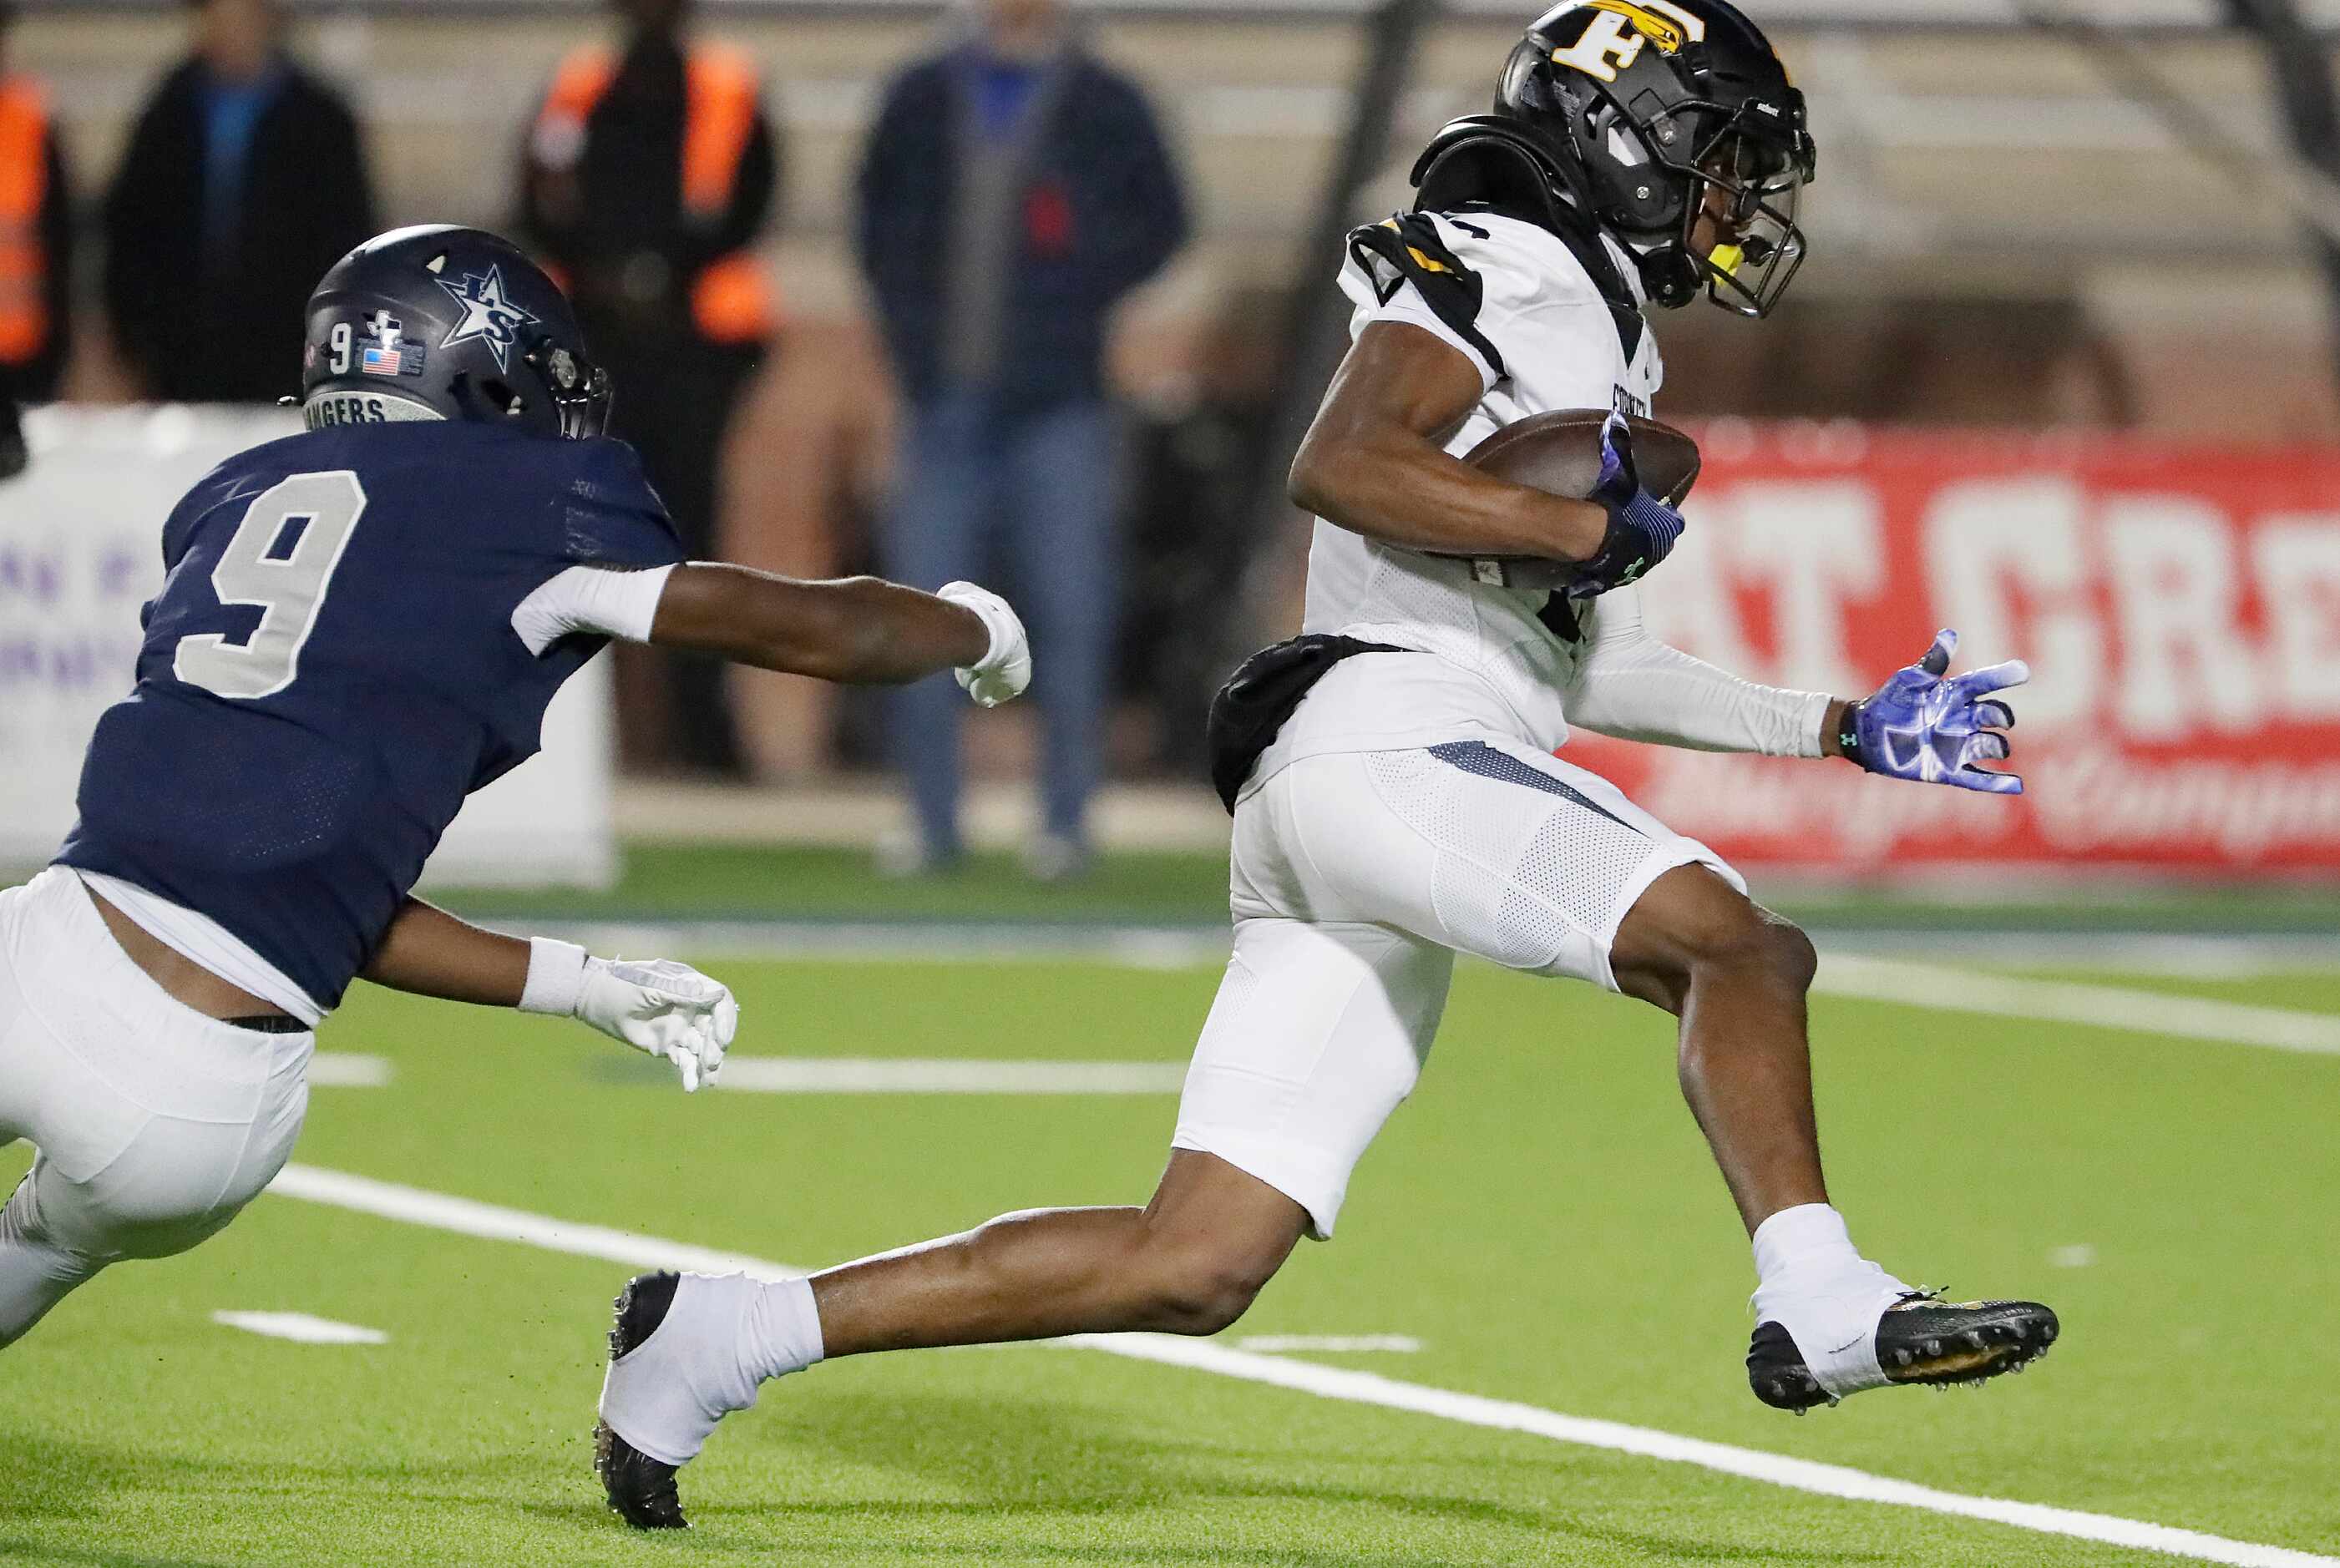 Forney High School wide receiver Imari Jehiel (13) breaks through the tackle attempt by Lone...